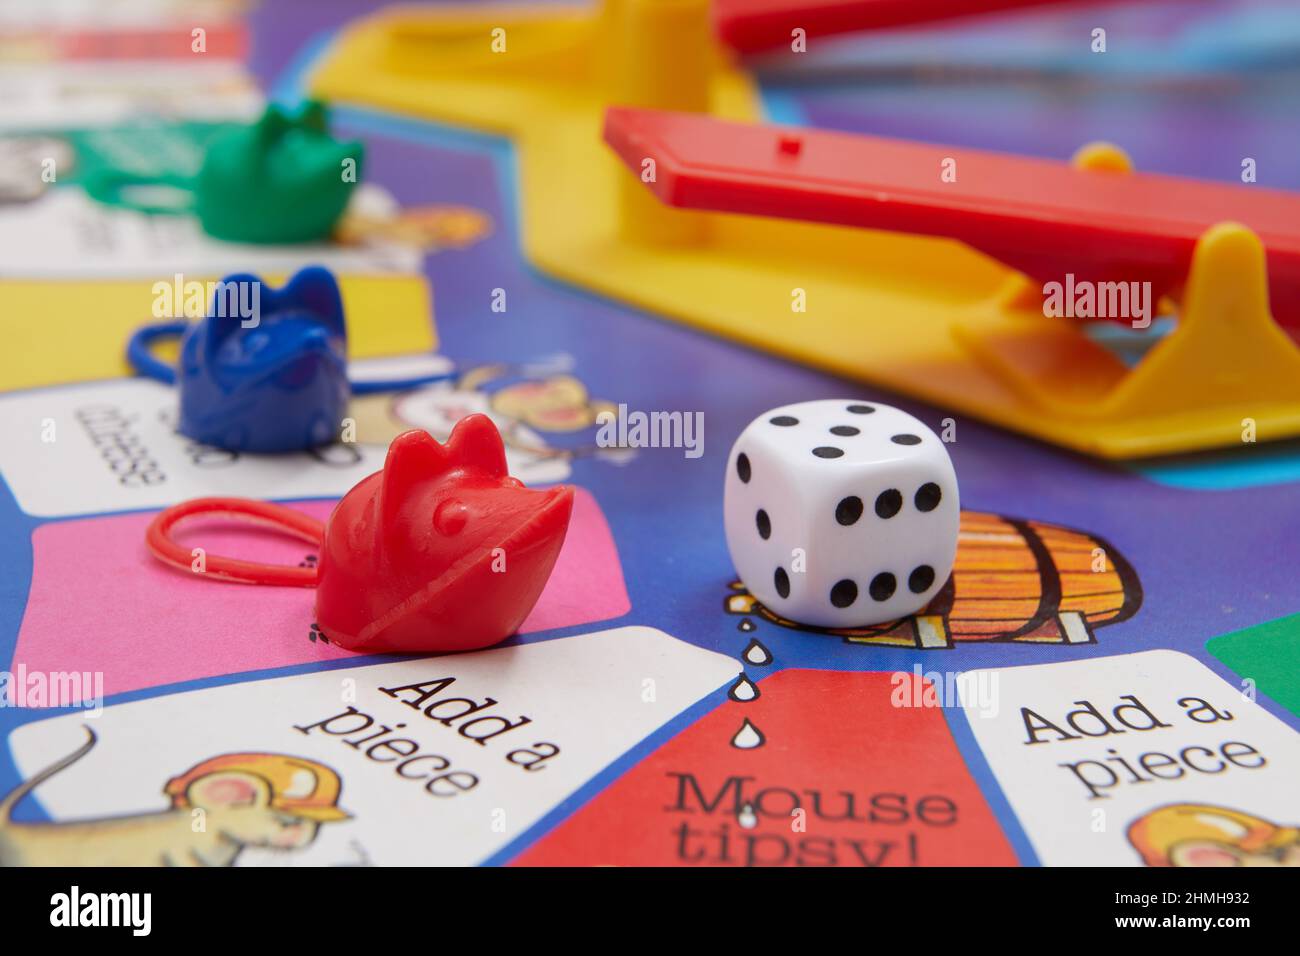 https://c8.alamy.com/comp/2HMH932/close-up-photograph-of-playing-pieces-on-a-mouse-trap-board-game-2HMH932.jpg